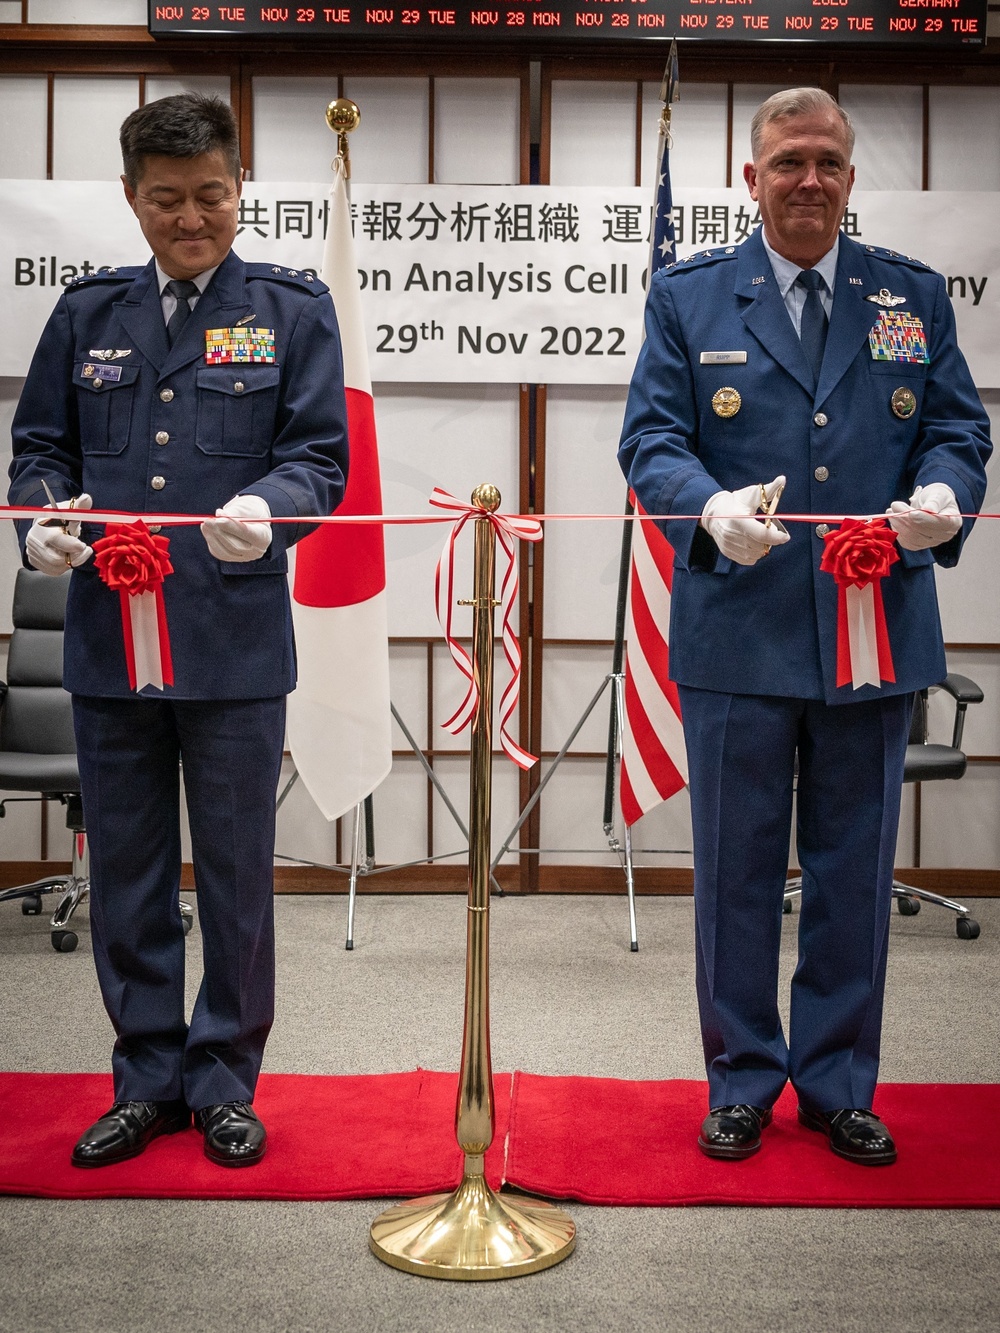 U.S.-Japan hold Bilateral Intelligence Analysis Cell Opening Ceremony